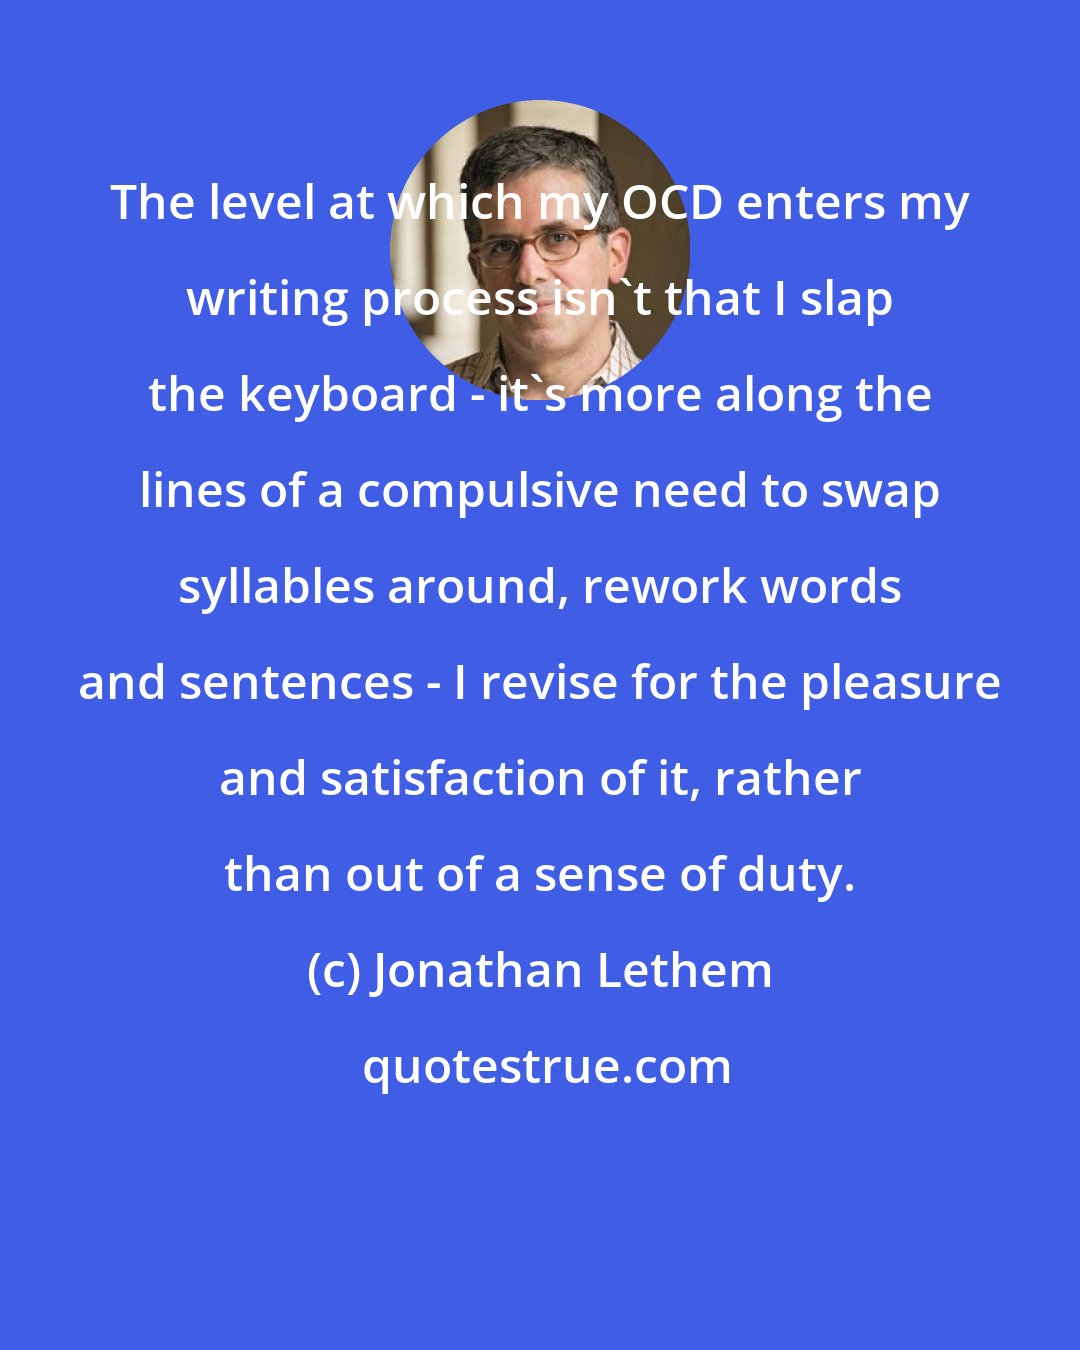 Jonathan Lethem: The level at which my OCD enters my writing process isn't that I slap the keyboard - it's more along the lines of a compulsive need to swap syllables around, rework words and sentences - I revise for the pleasure and satisfaction of it, rather than out of a sense of duty.